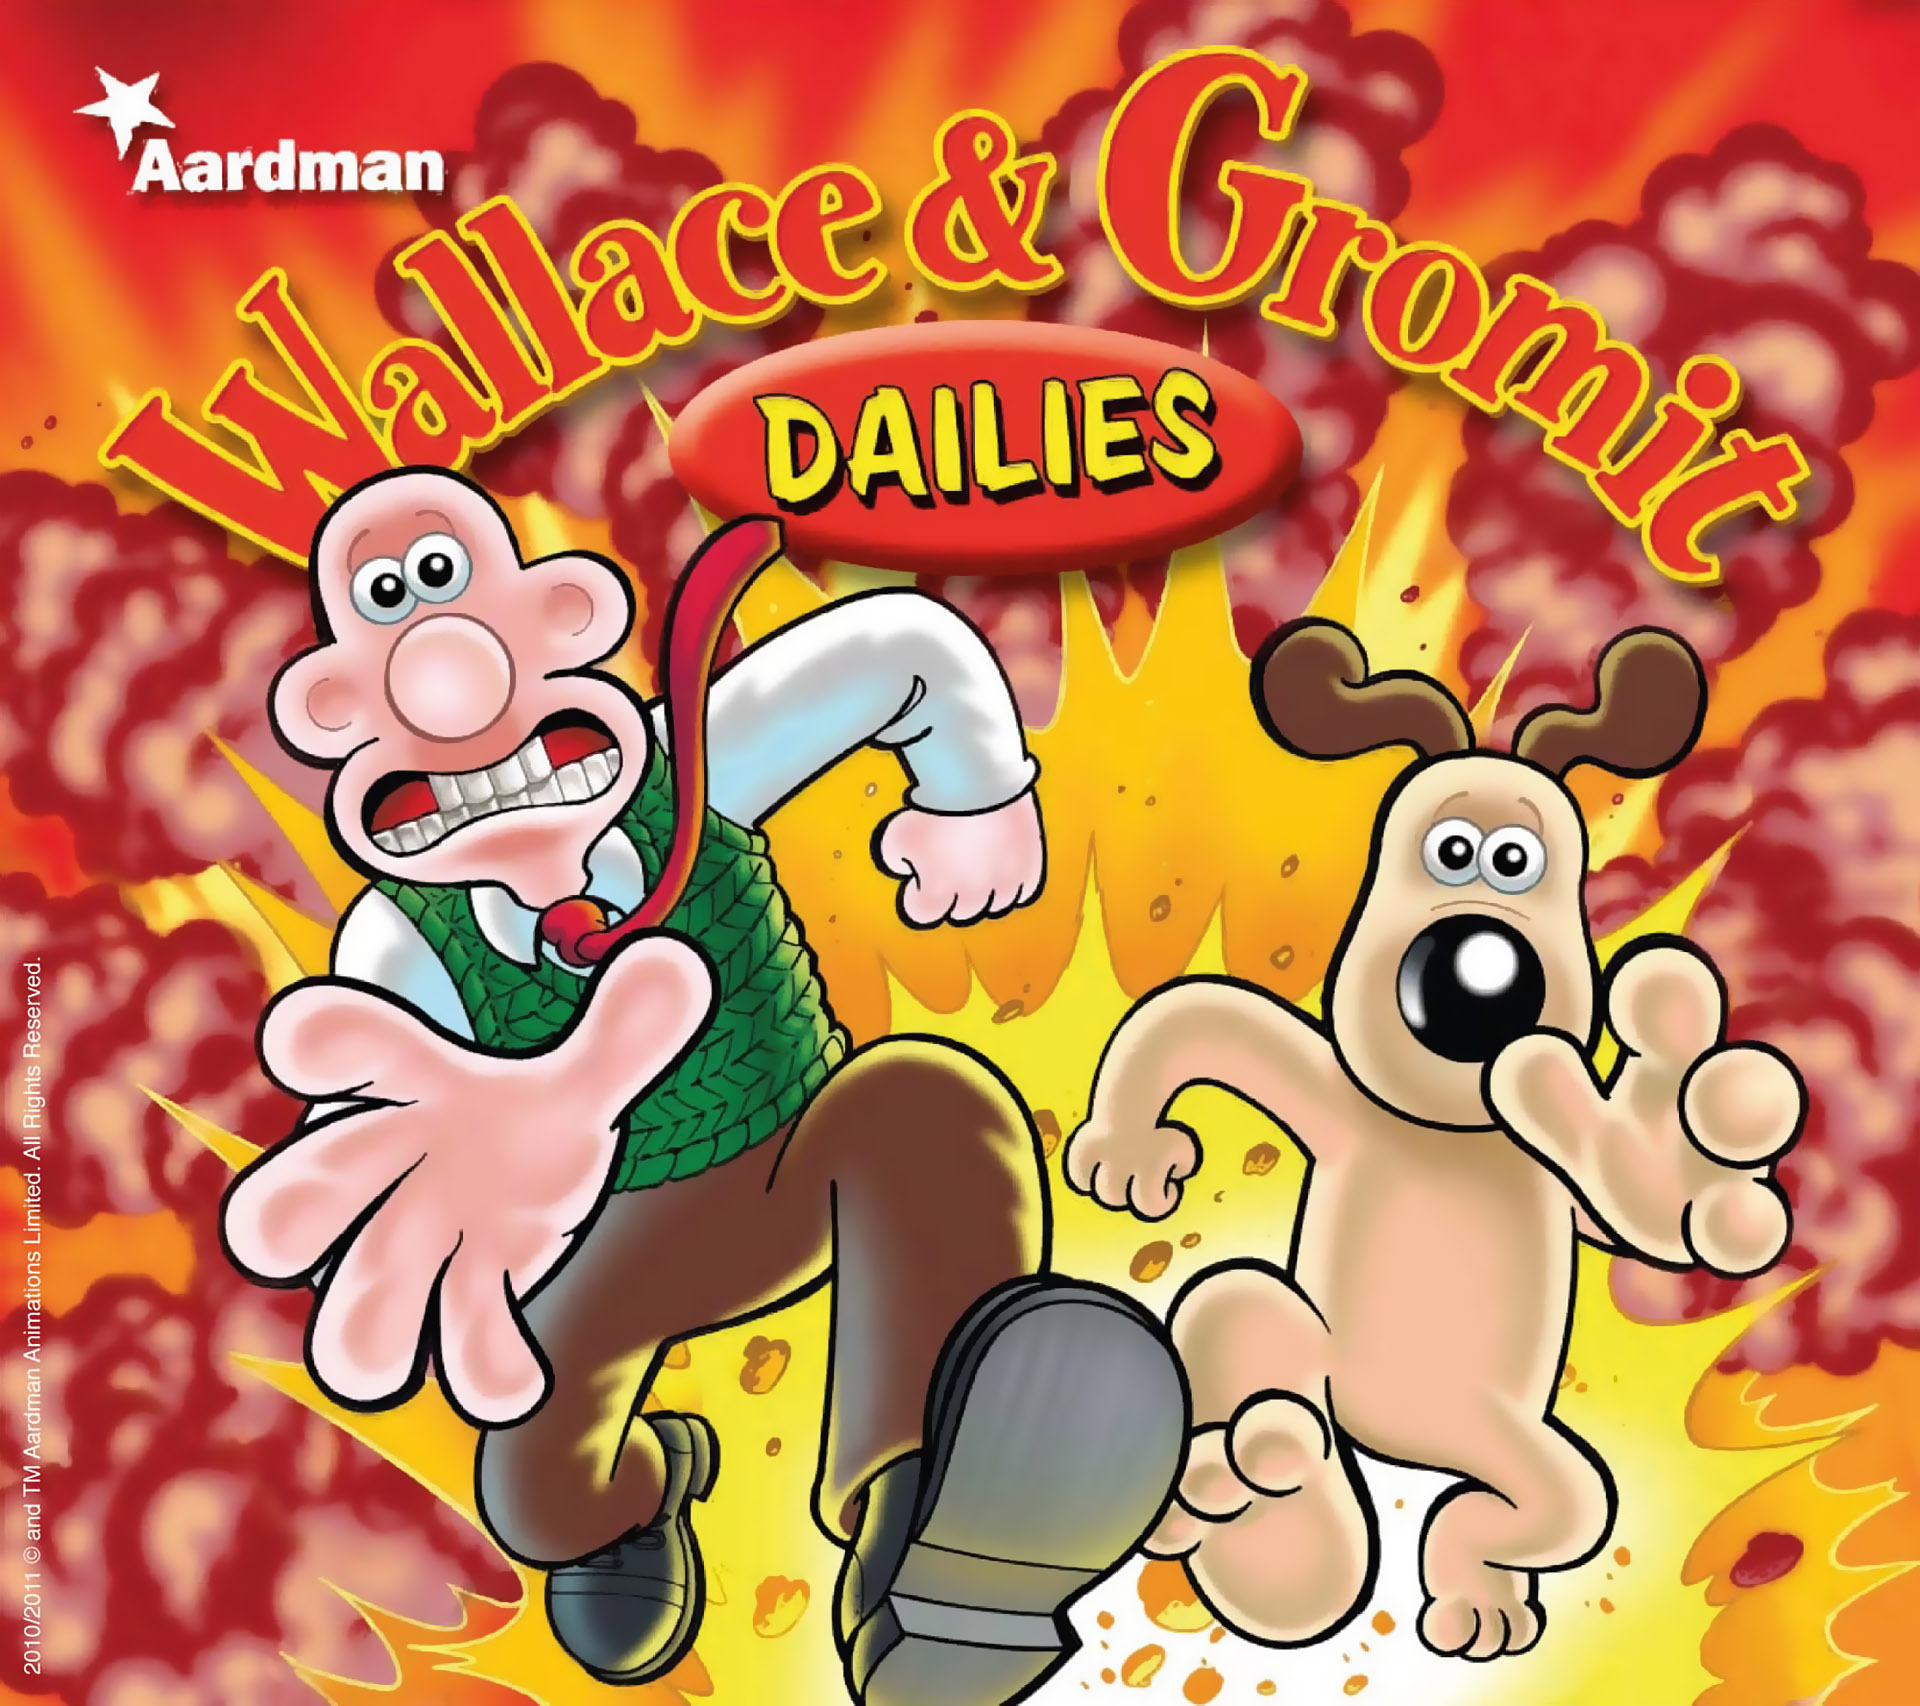 Read online Wallace & Gromit Dailies comic -  Issue #1 - 1